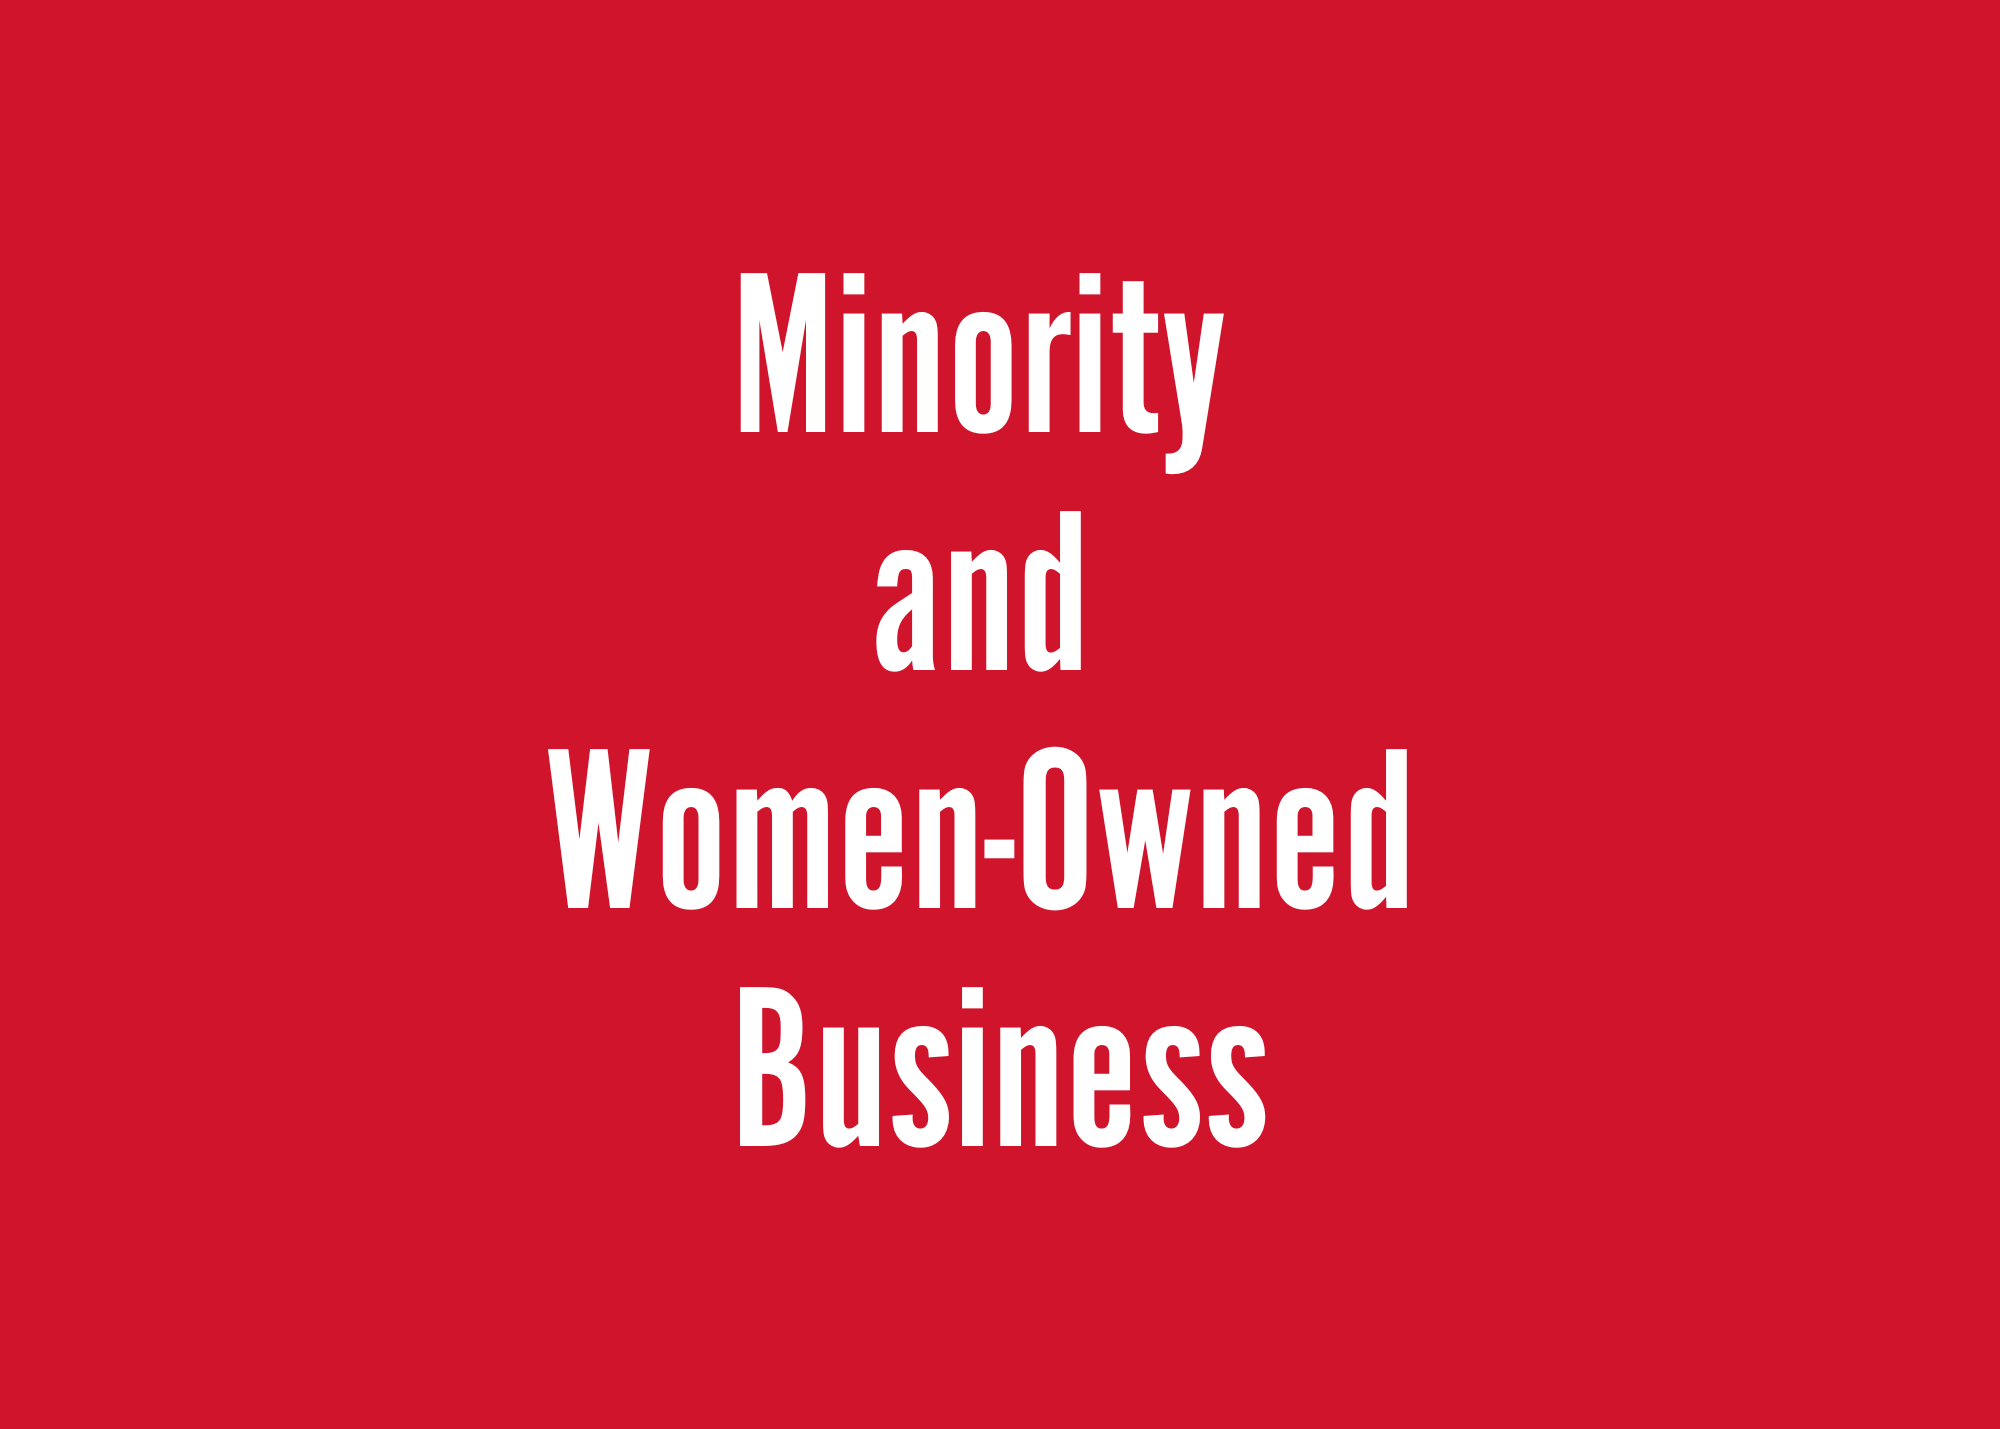 Matchmaker' Event for Minority- and Women-Owned Businesses to be Held May 11